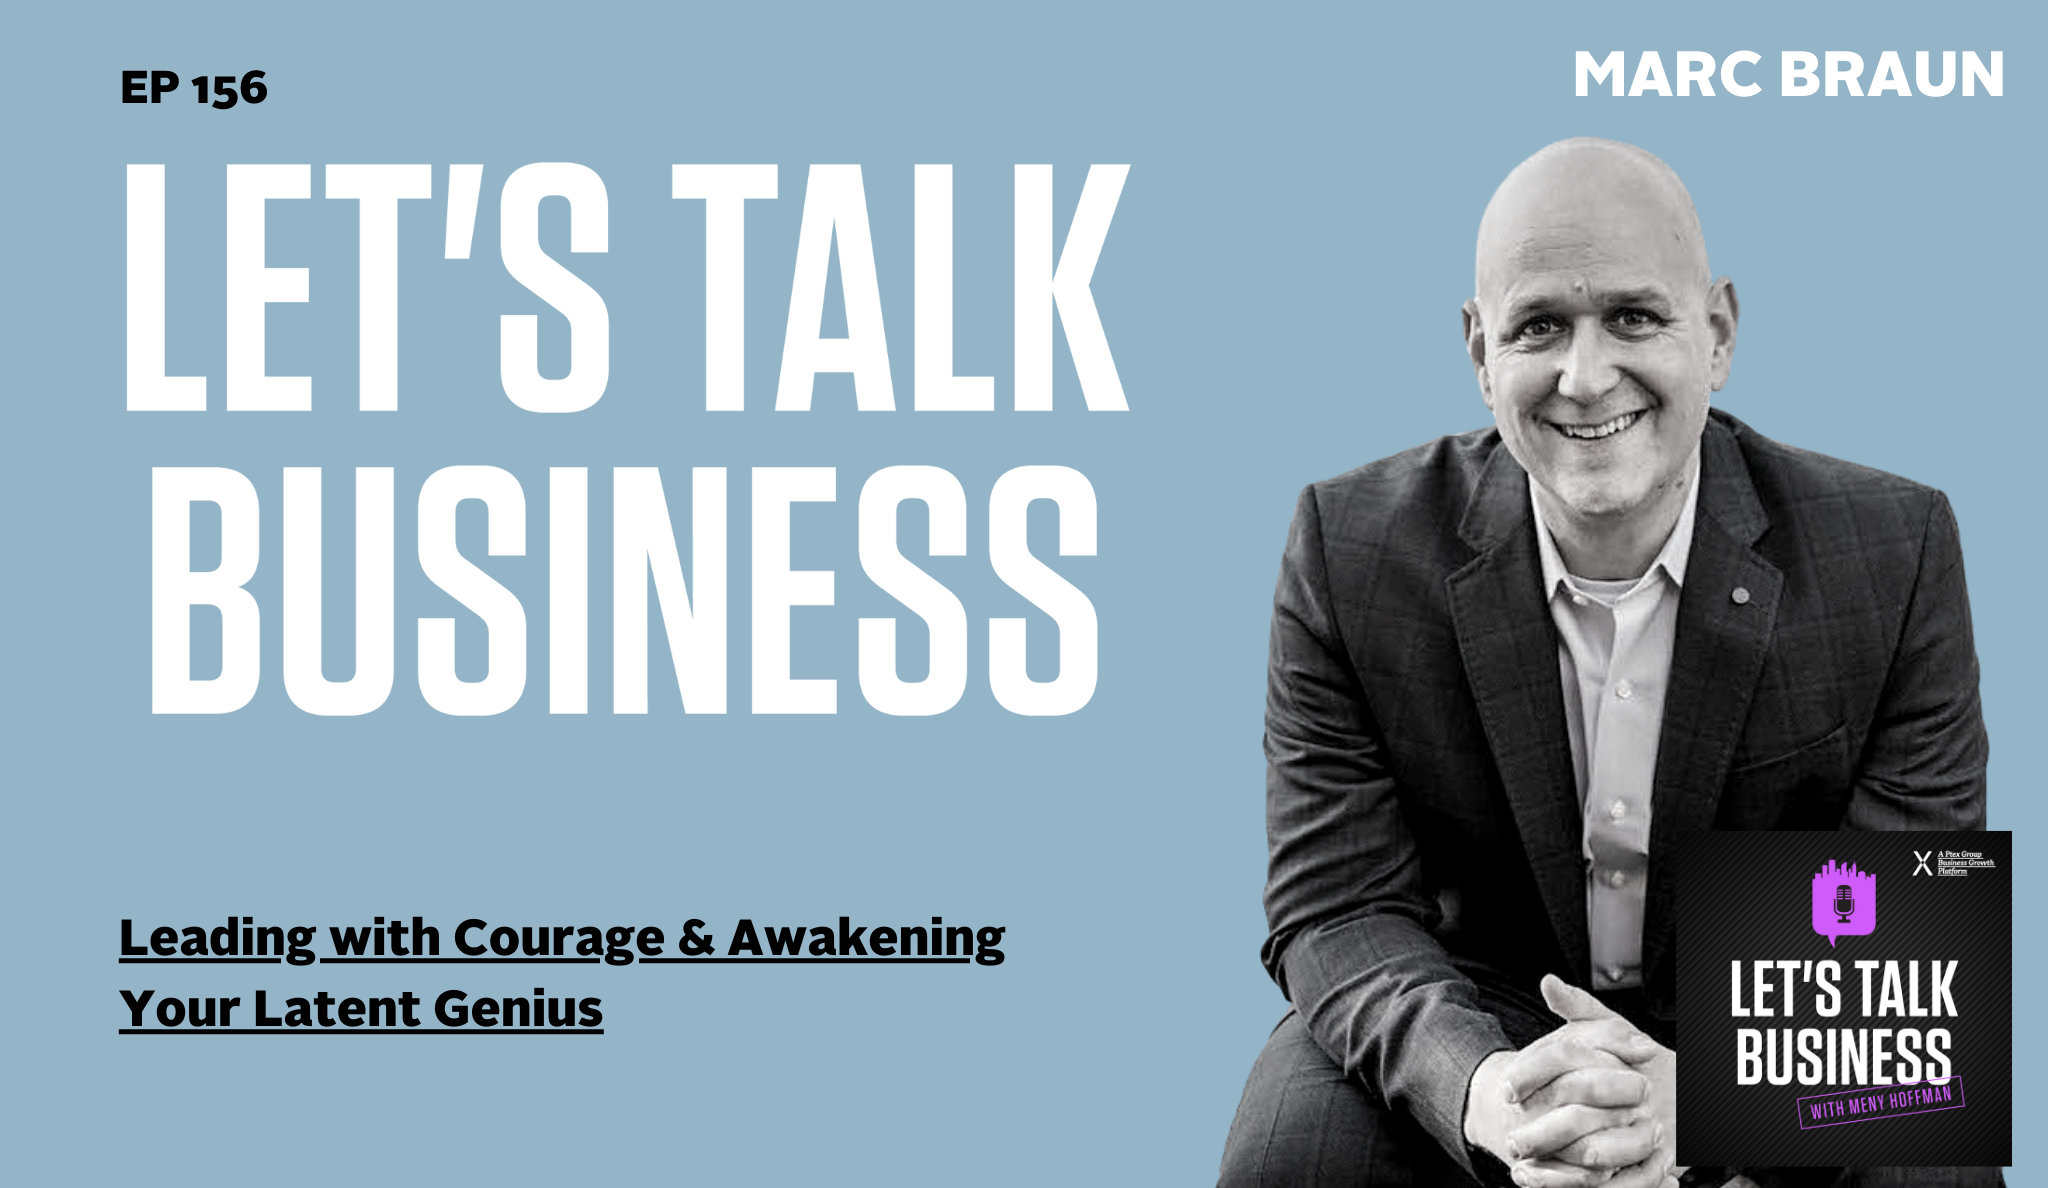 Leading with Courage & Awakening Your Latent Genius with Marc Braun